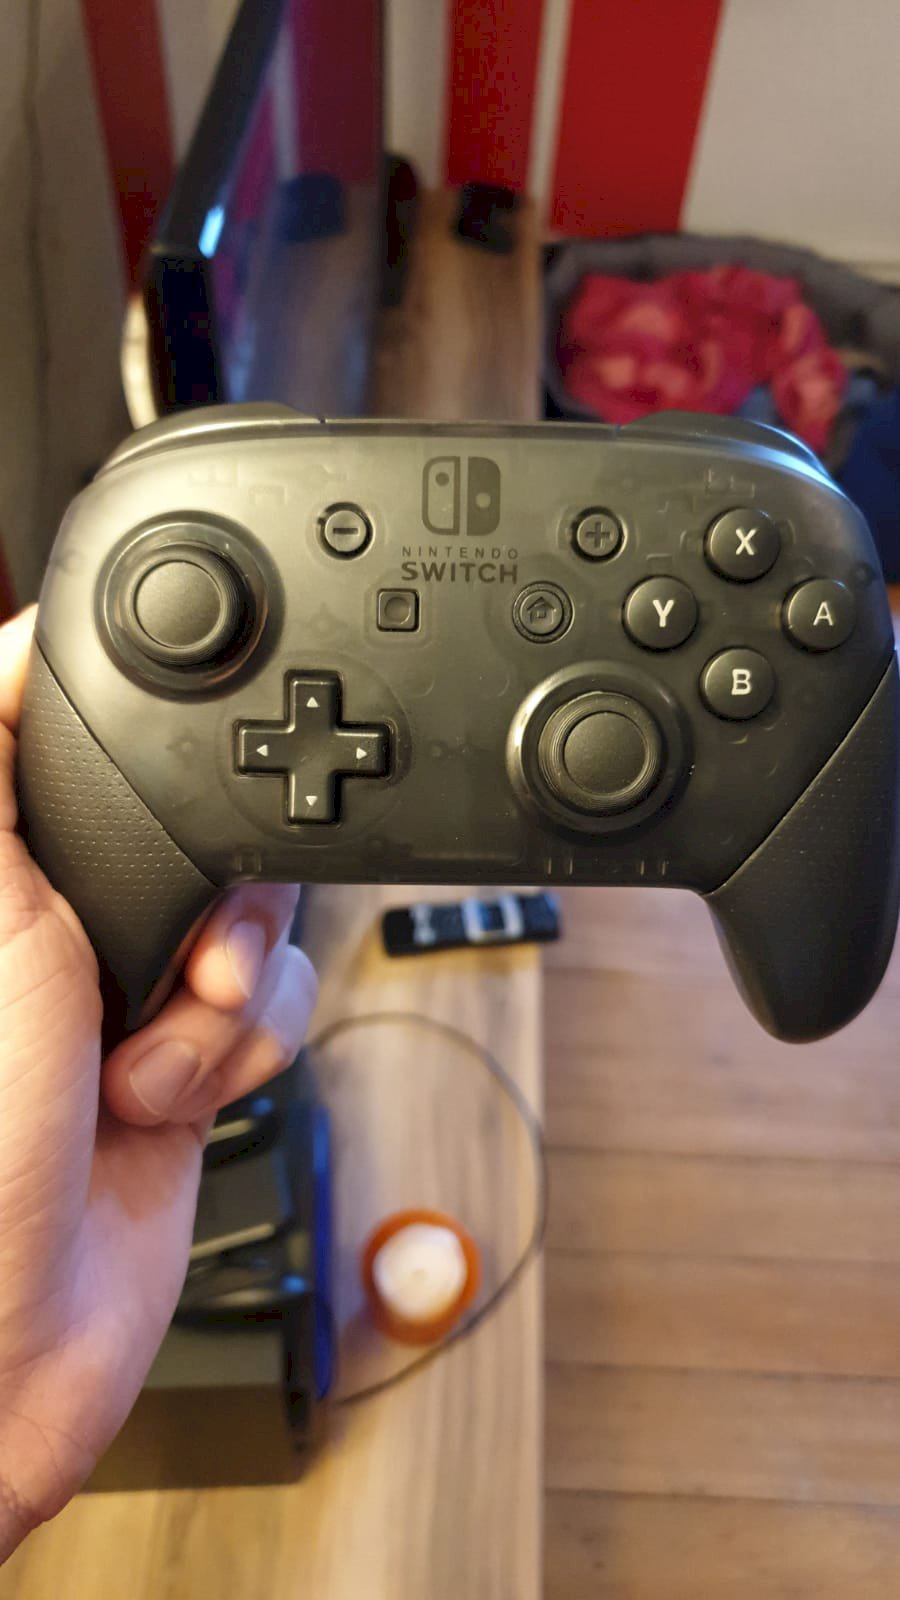 Is this Nintendo Switch Pro Controller genuine